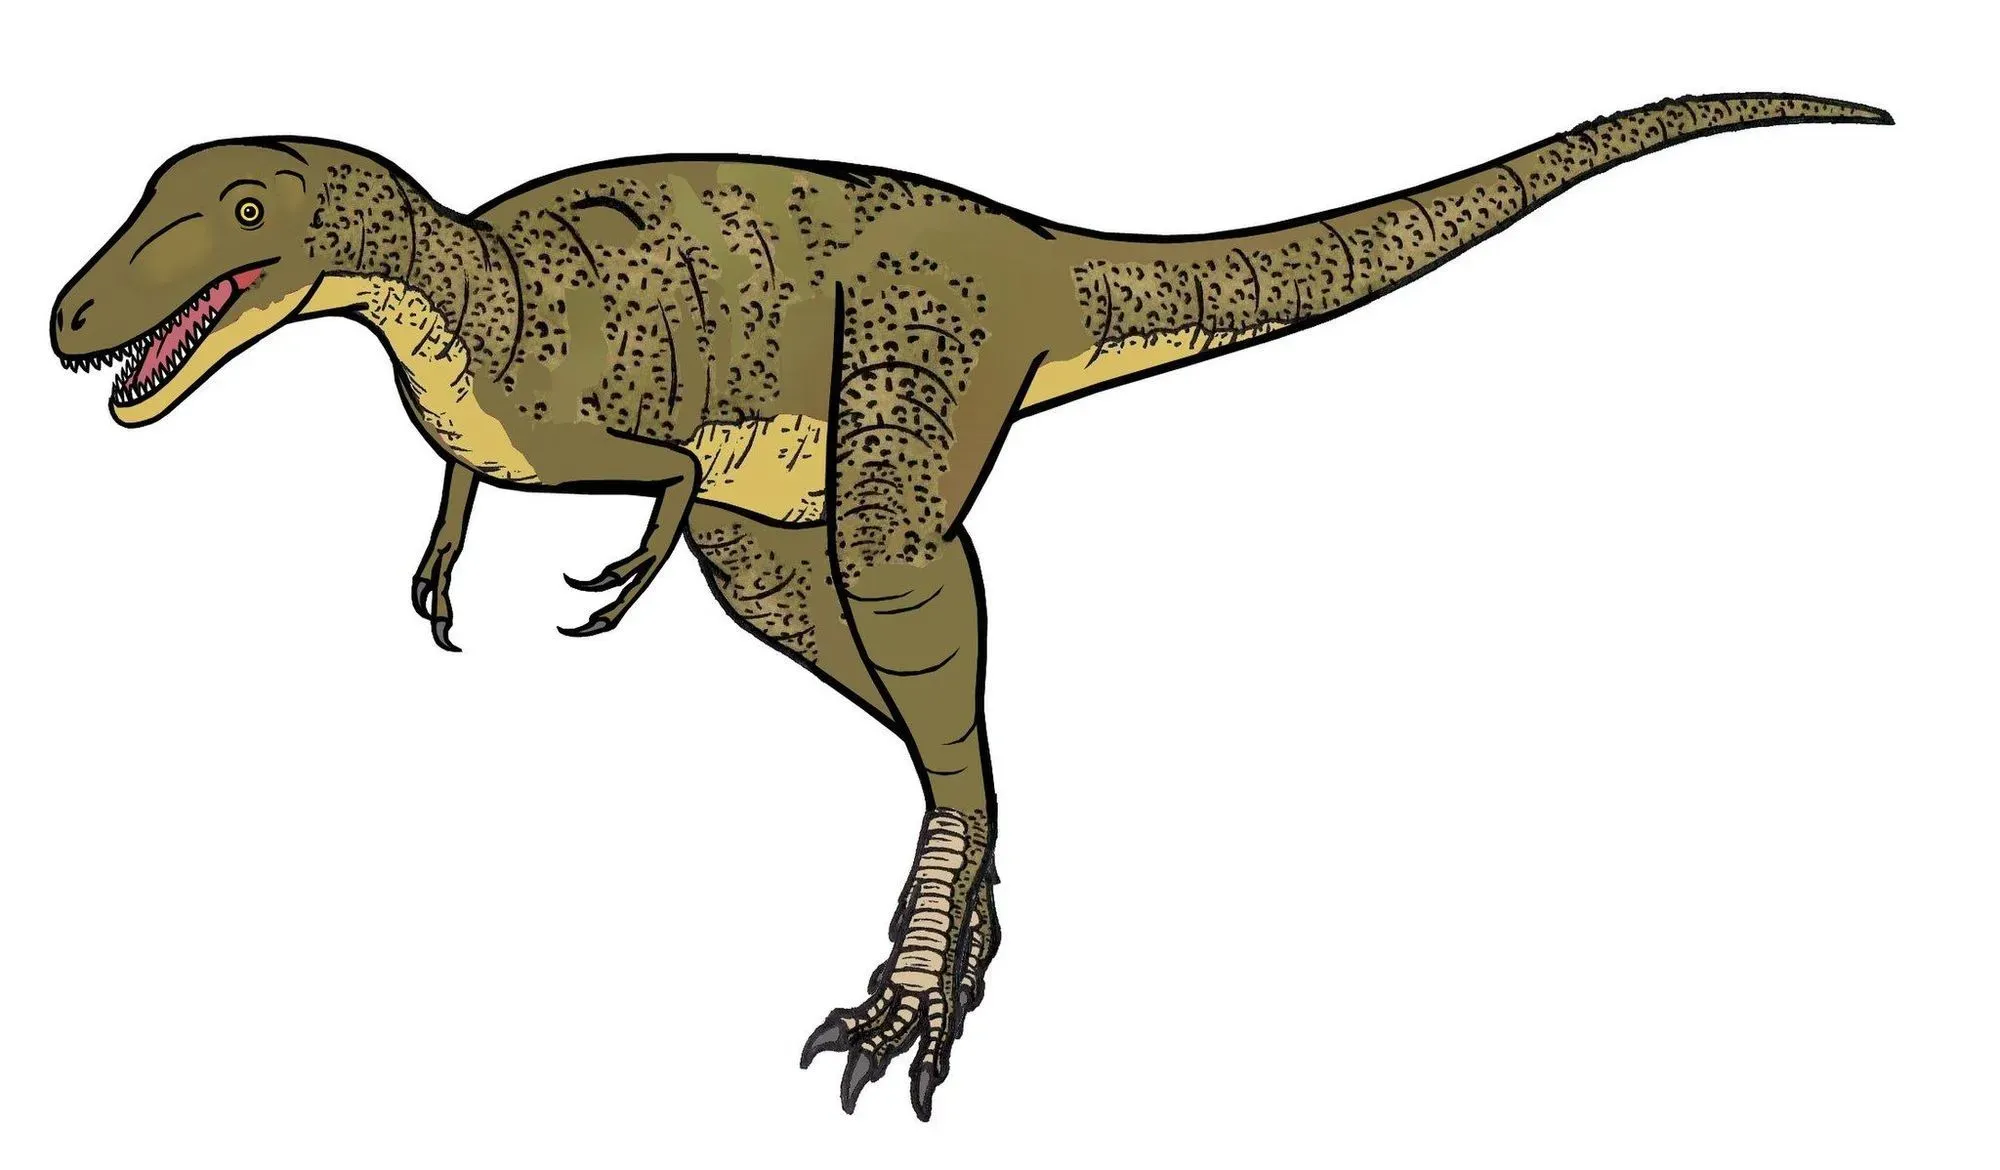 Altispinax dinosaurs was a huge meat-eater from 138-135 million years ago.